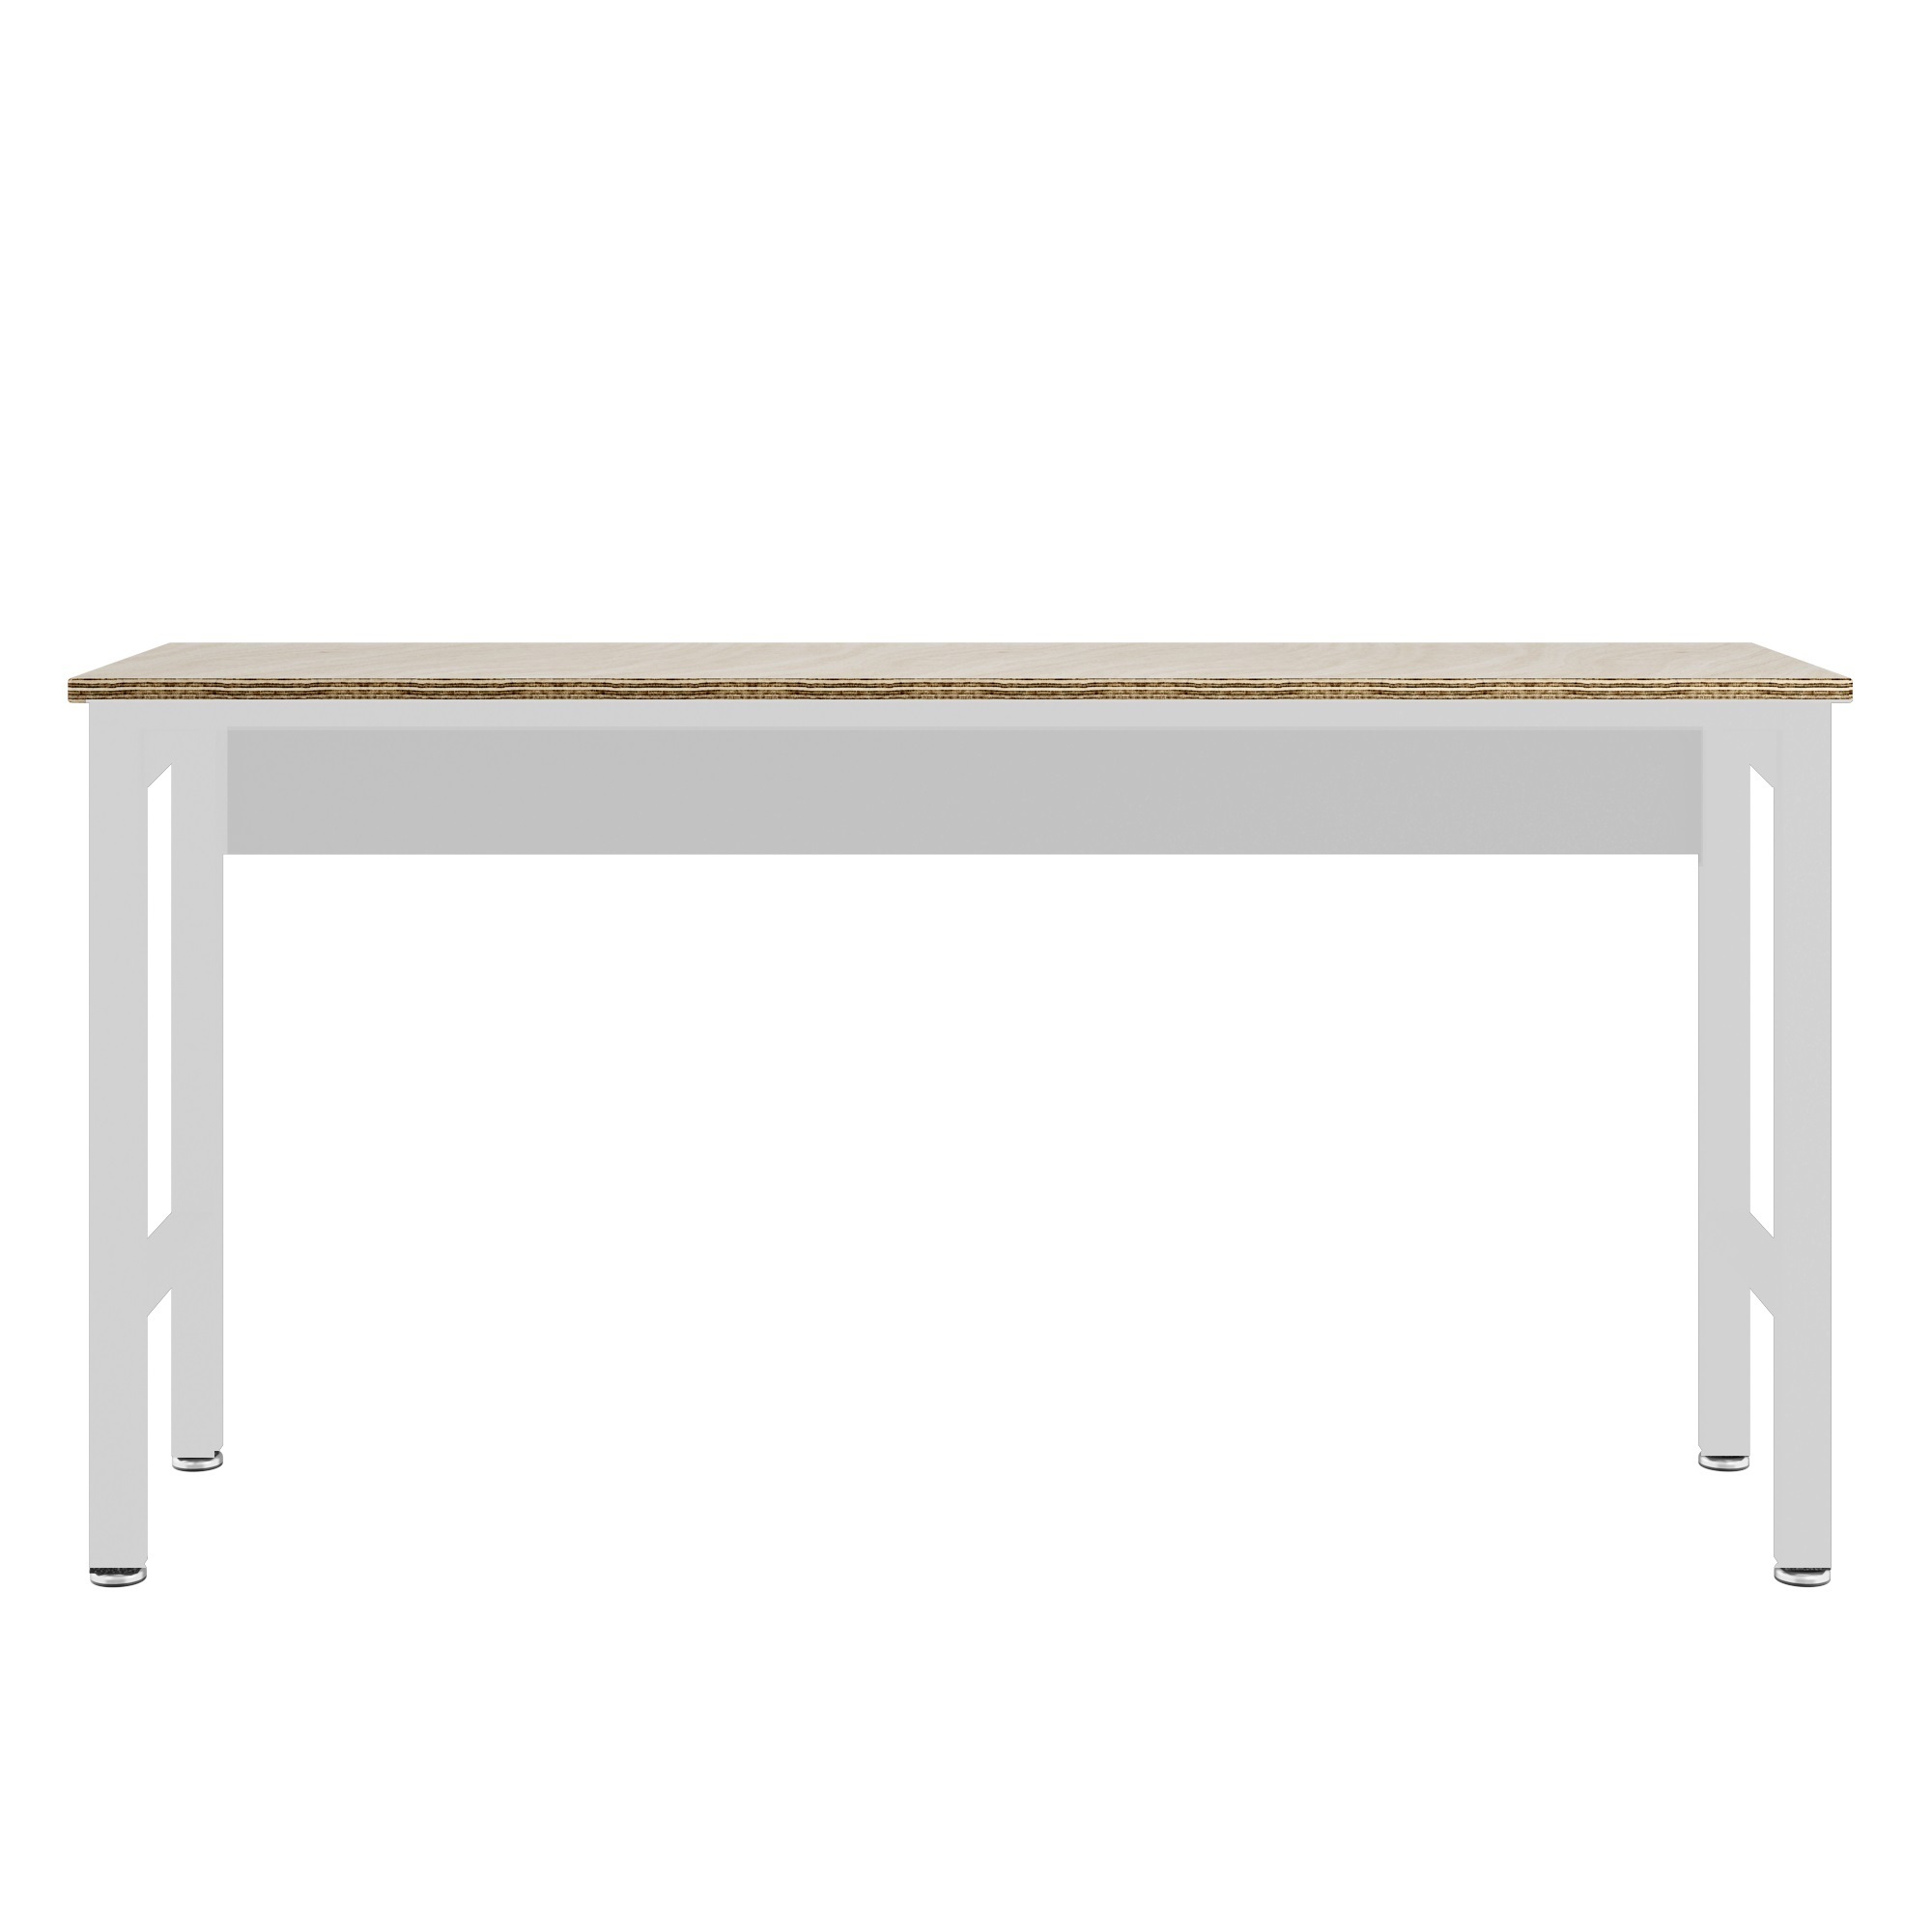 Manhattan Comfort, Fortress Wood and Steel Garage Table in White, Width 72.4 in, Height 37.6 in, Depth 20.5 in, Model 6GMC